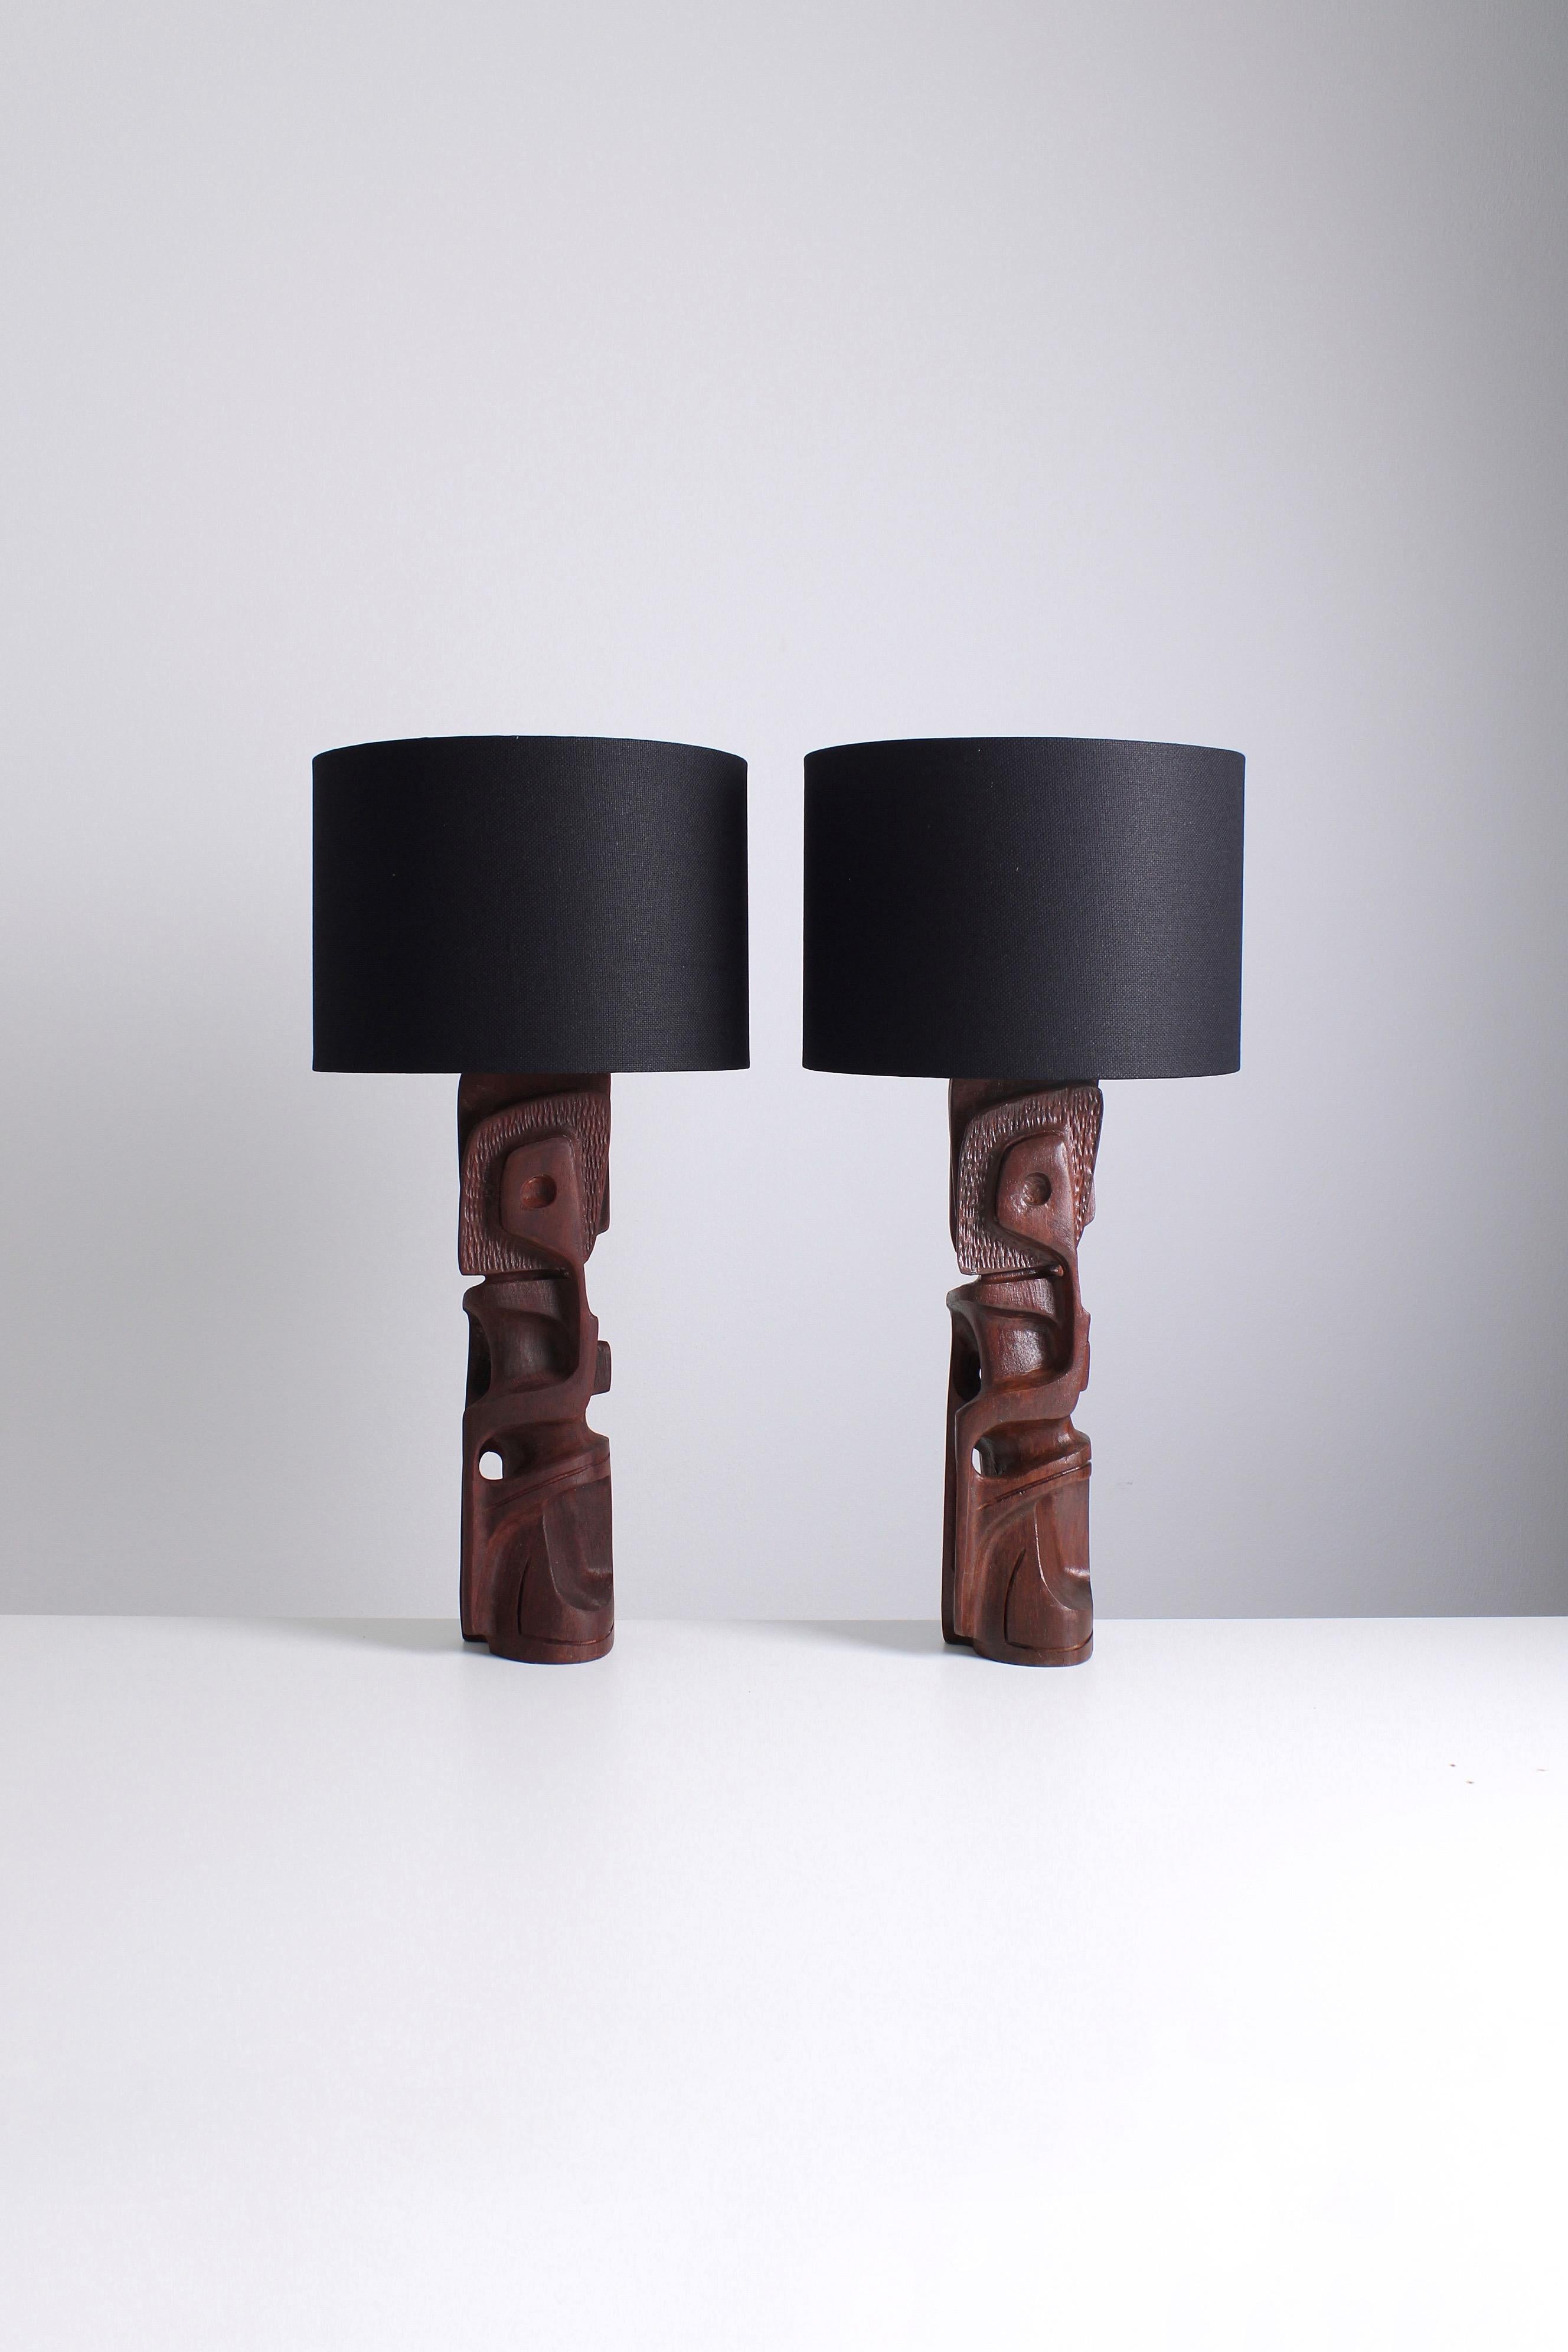 A set of sculpted table lamps crafted by Gianni Pinna during the 1970s. Made from Legno Padouk wood, these lamps exude a rugged and brutalist aesthetic. It’s worth noting that while both lamps showcase similar designs, they exhibit slight variations